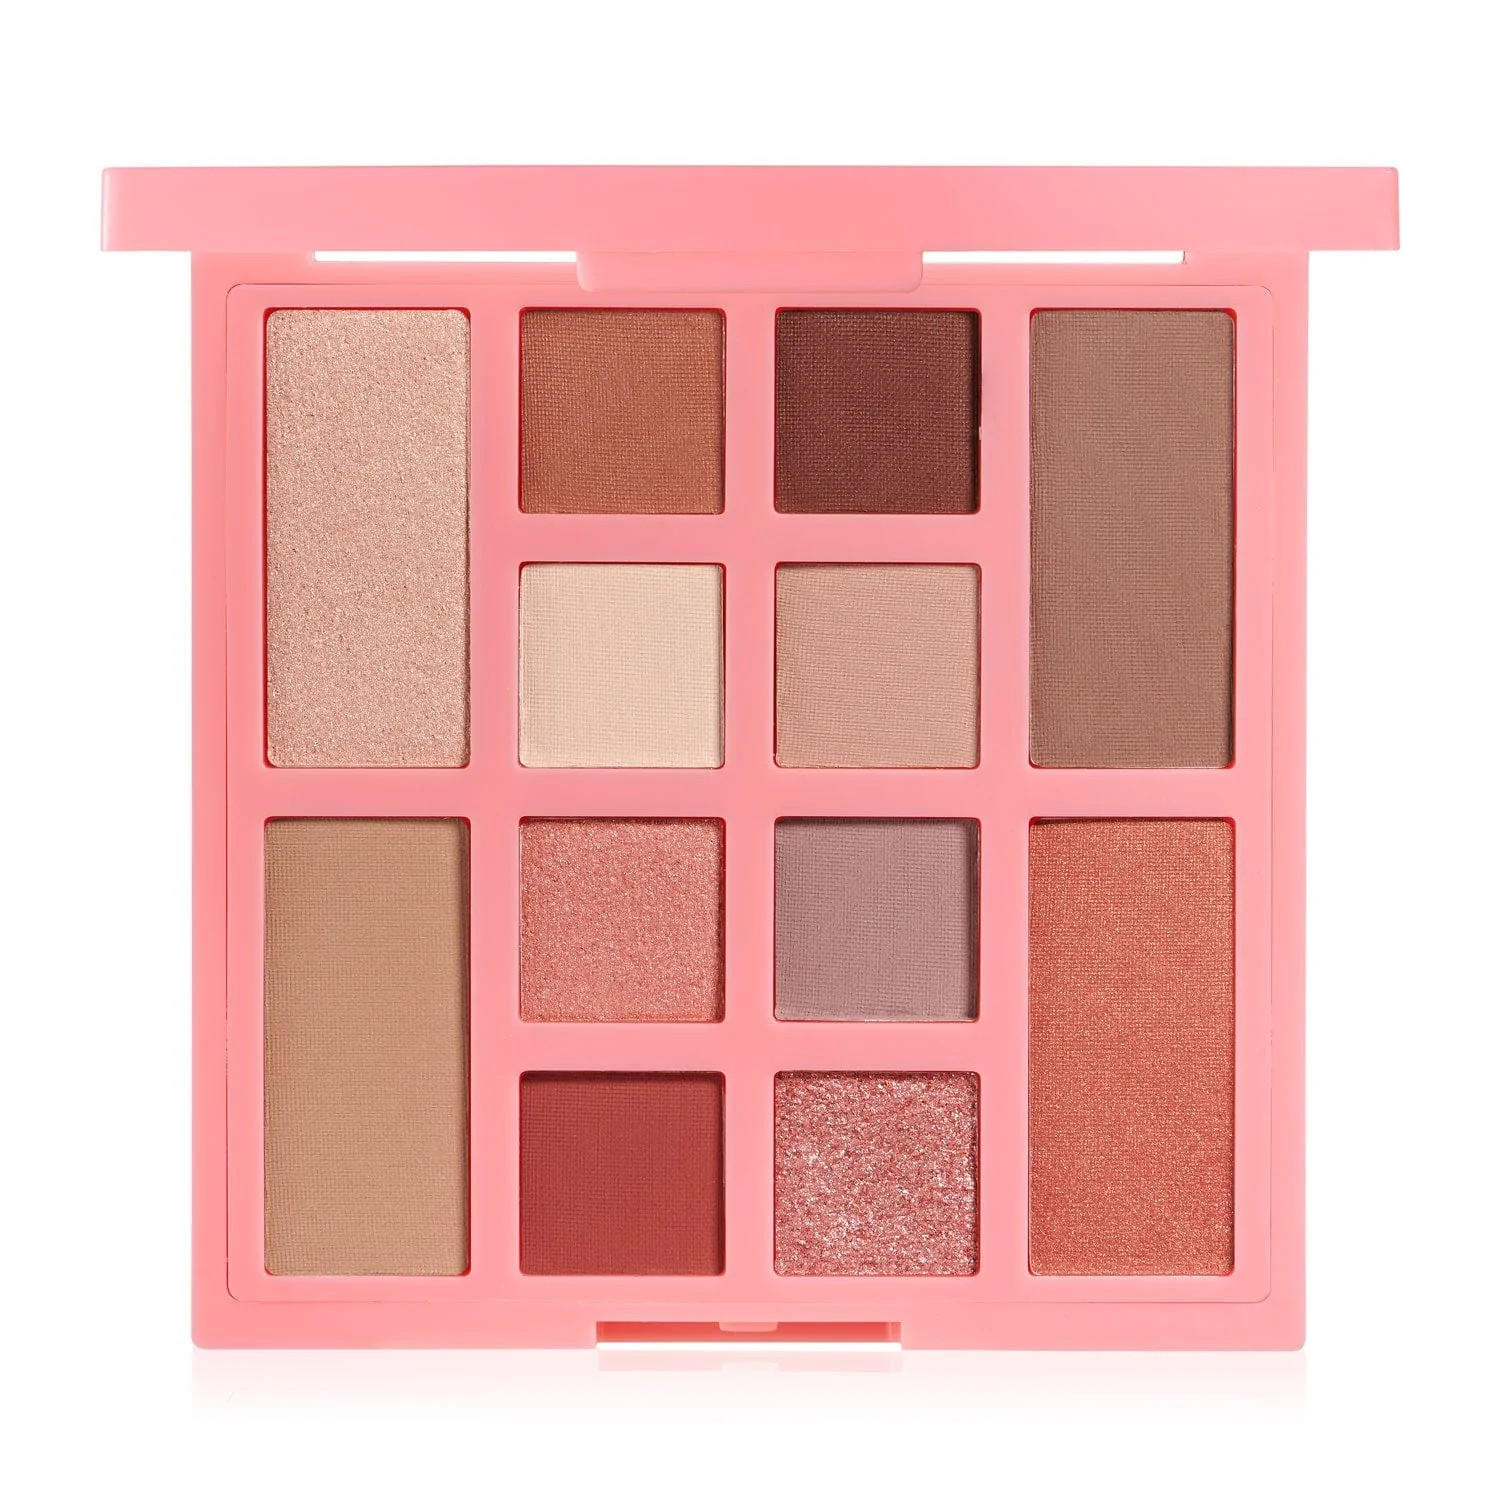 Ciate London Everyday Vacay Palette